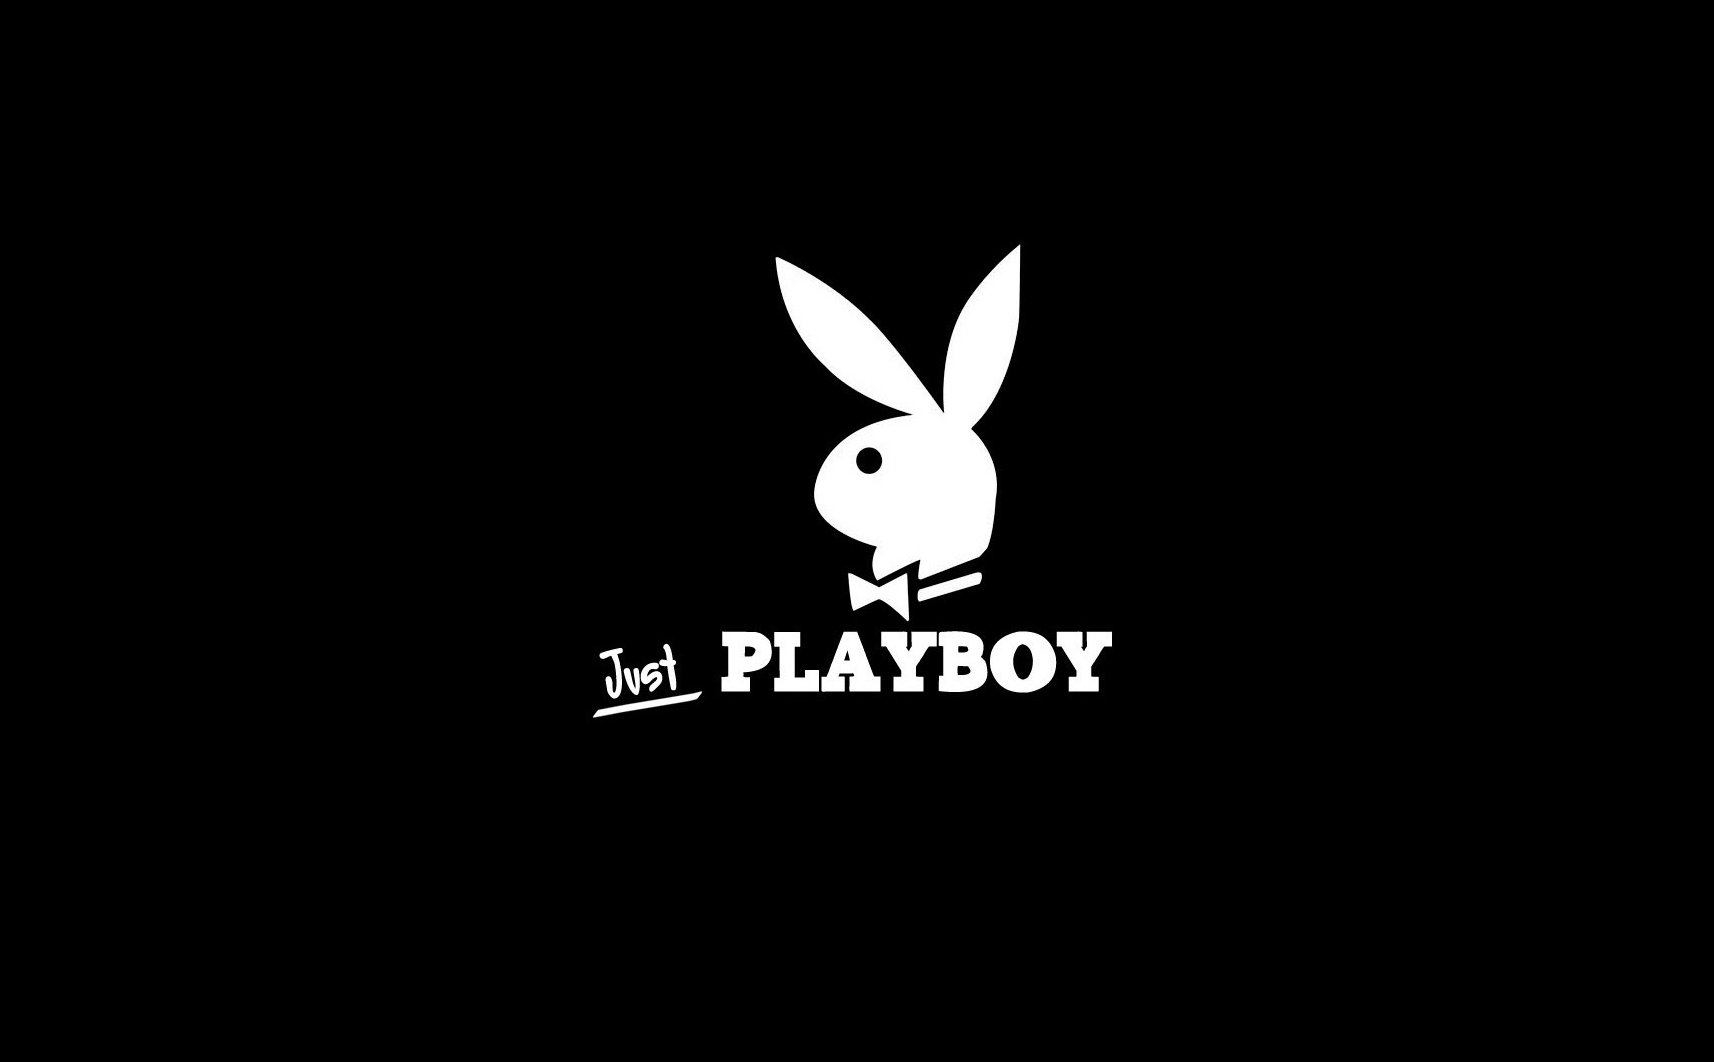 Playboy Logo hd wallpapers Only hd wallpapers